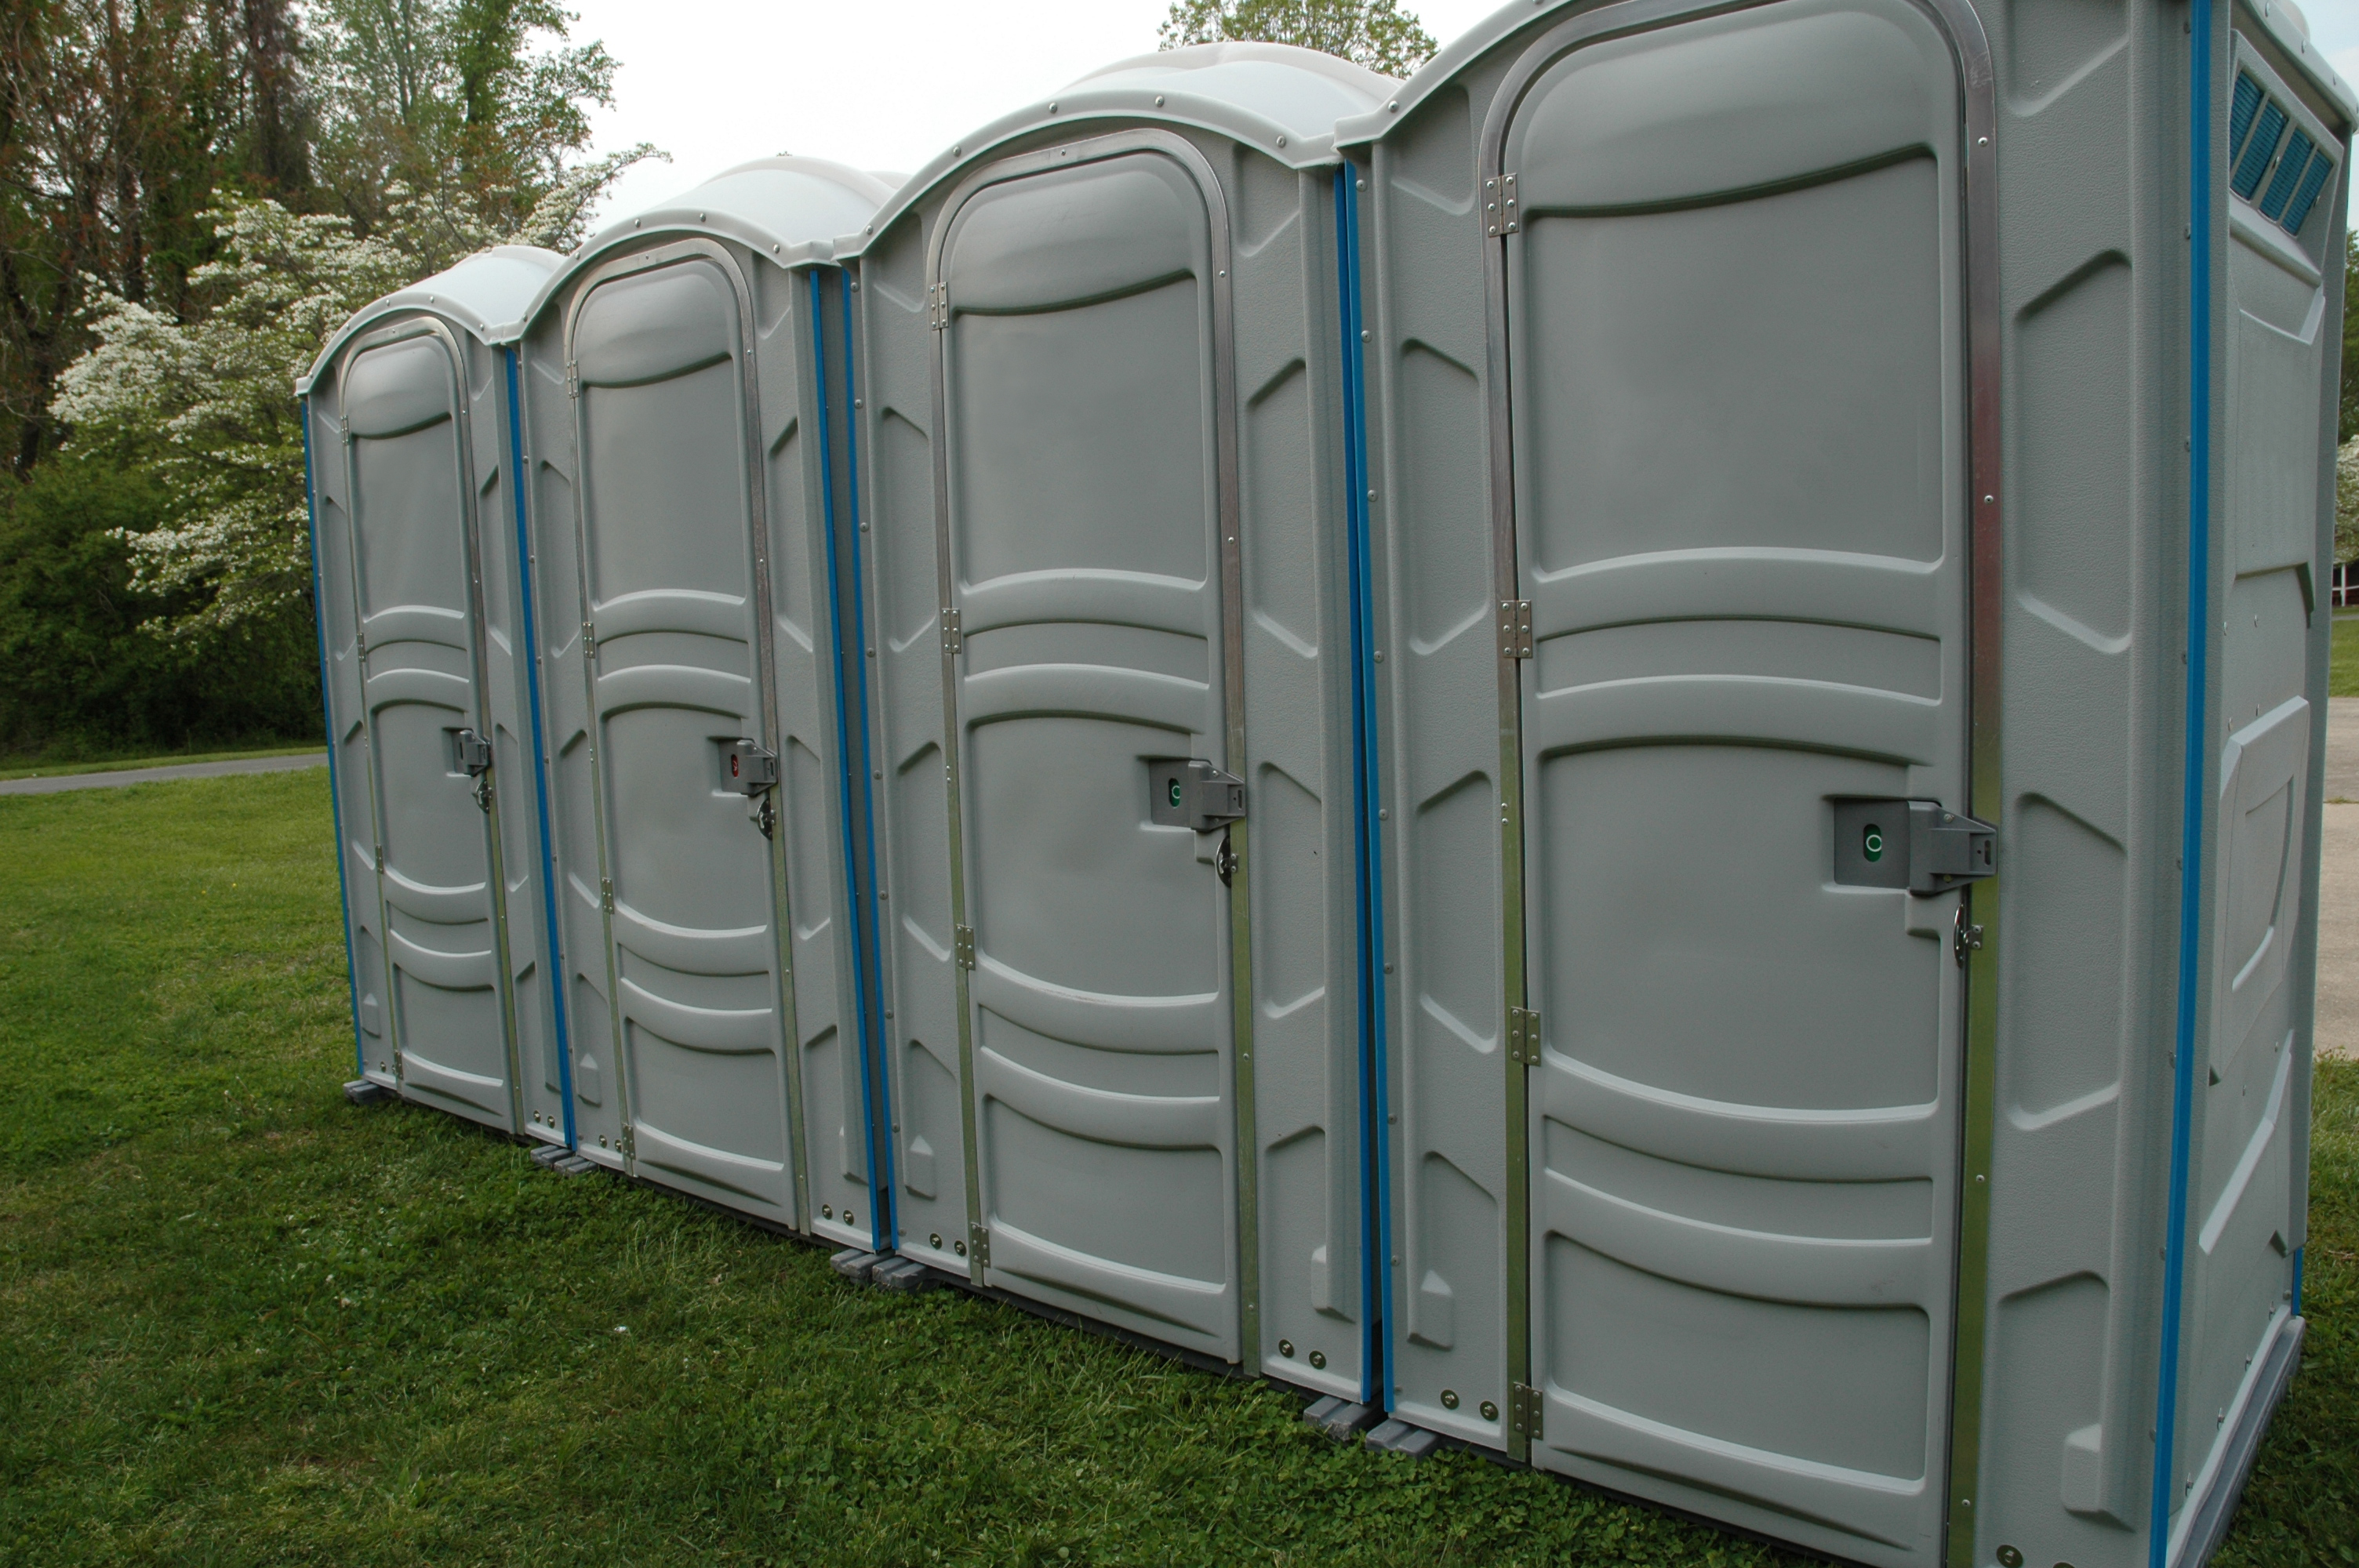 Portable Toilets & Supplies for Your Portable Restroom Operation